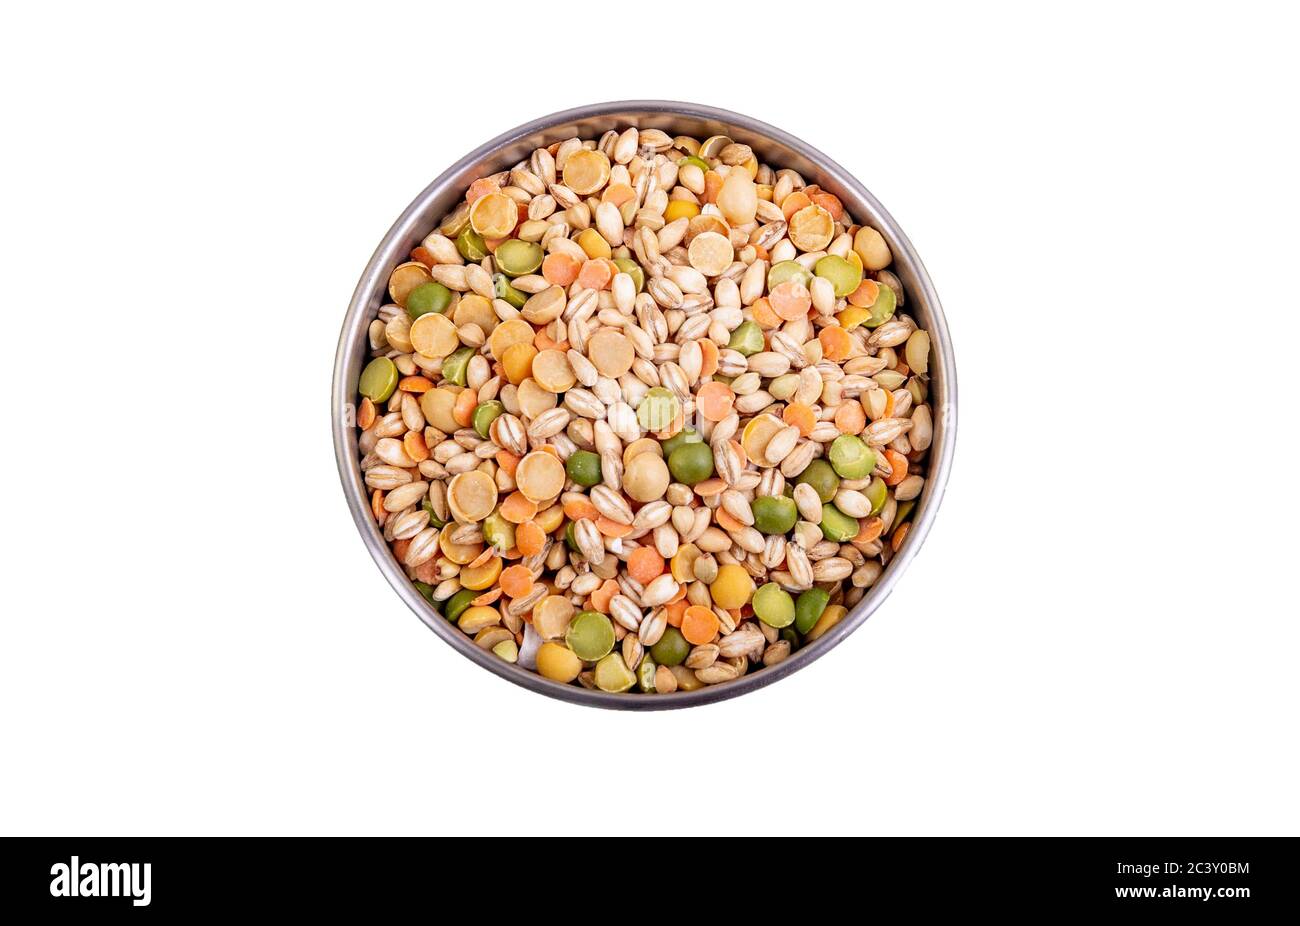 Soup mix, great for soups, casseroles and stew recipes Stock Photo